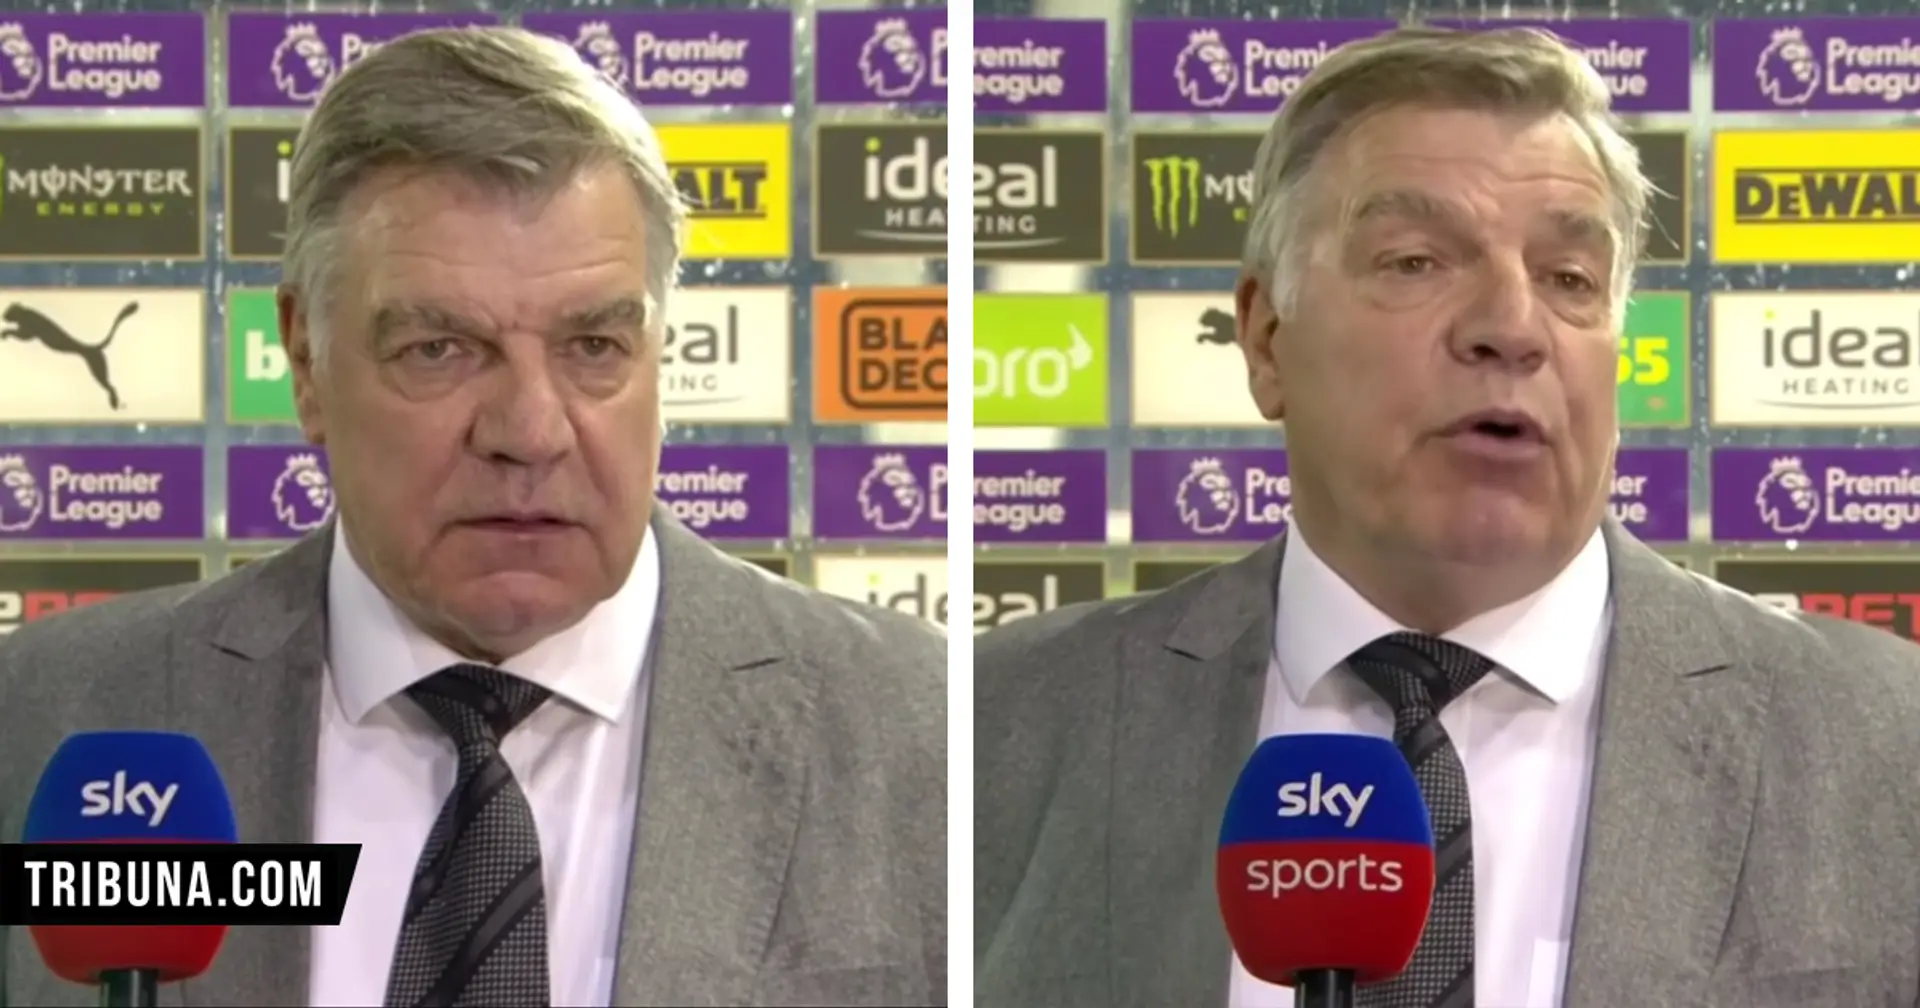 'They were dead lucky': Sam Allardyce takes another bizarre dig at Liverpool after West Brom lose to West Ham